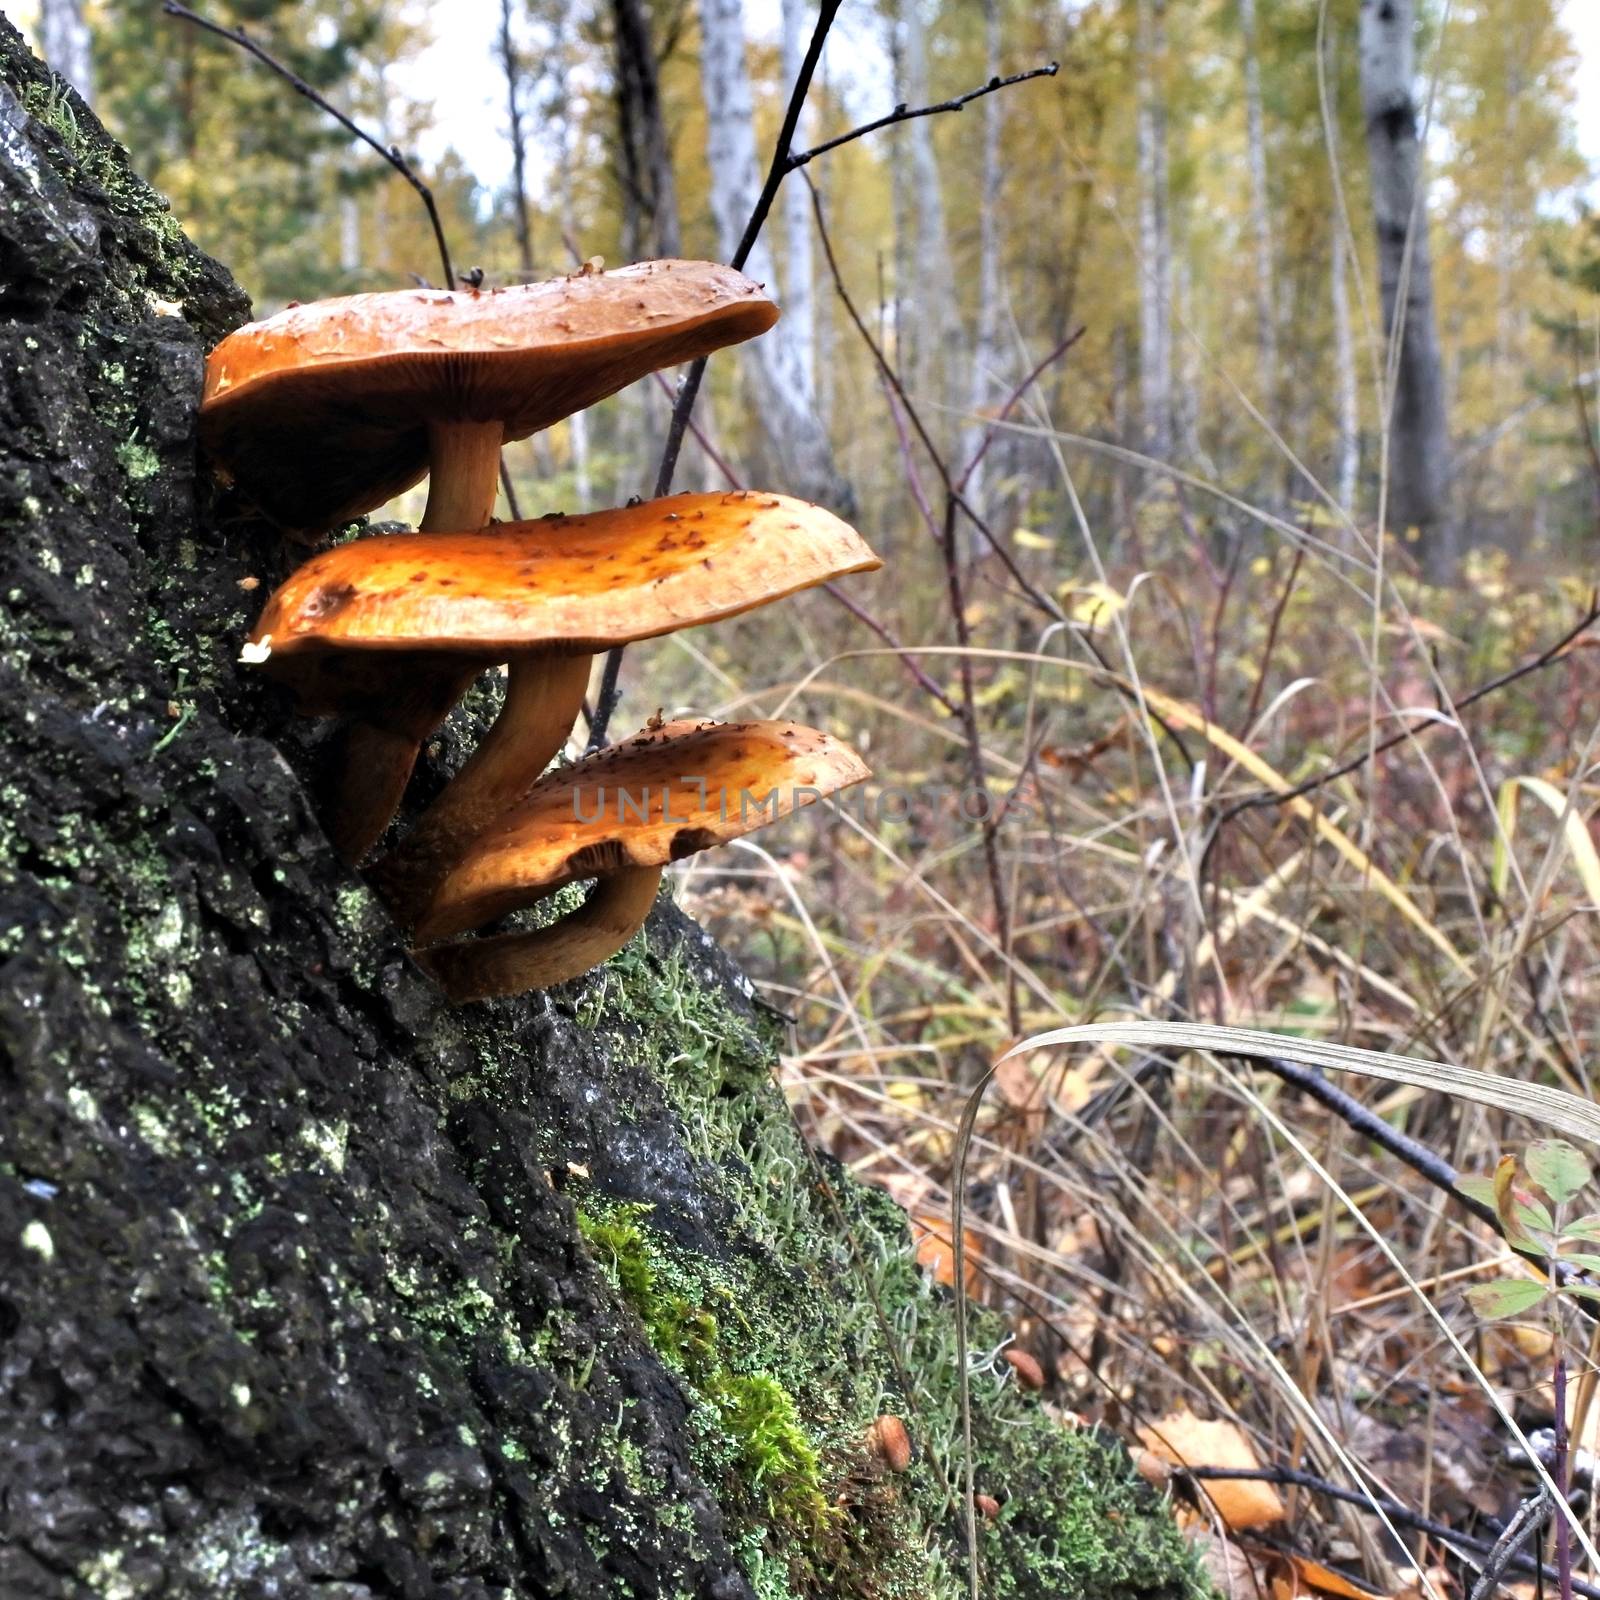 Several orange mushrooms growing on a tree in the october forest